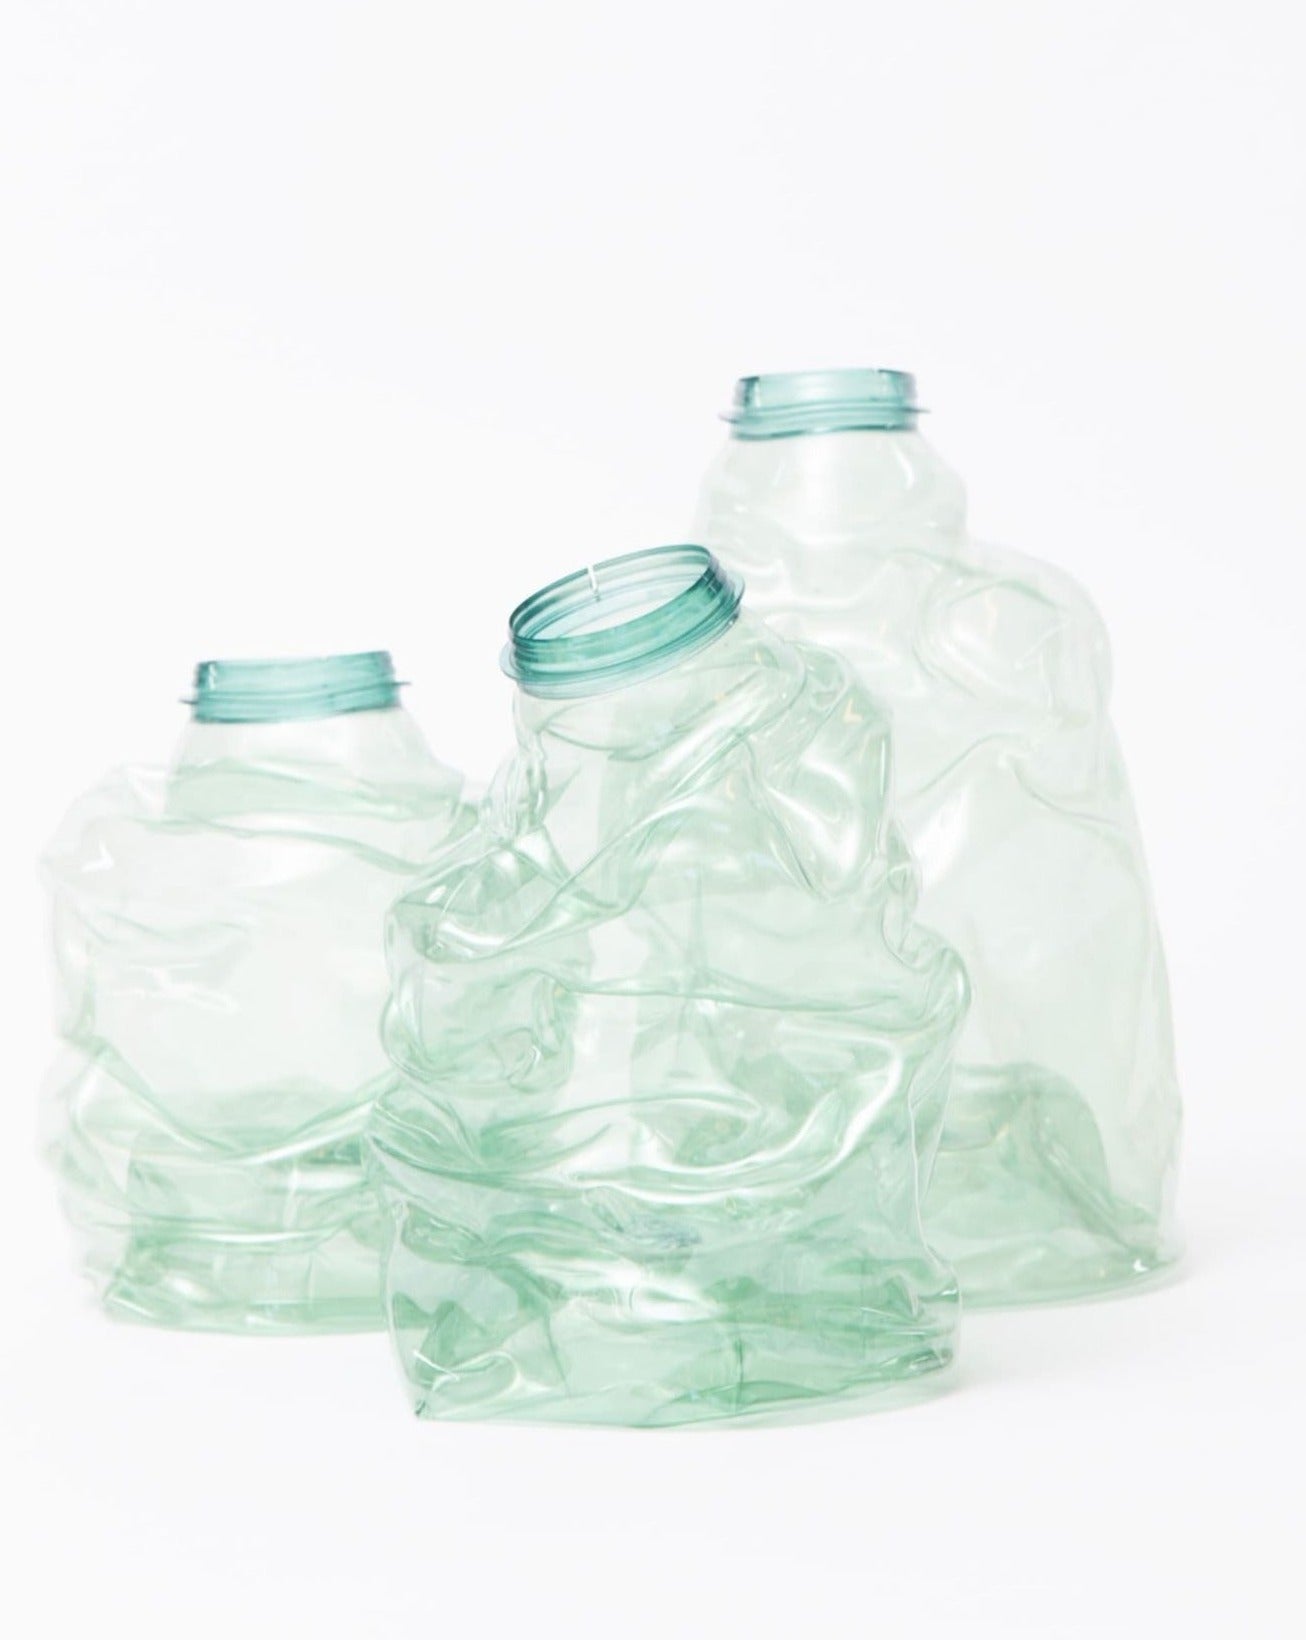 Green recycled plastic vases placed simultaneously on a white background